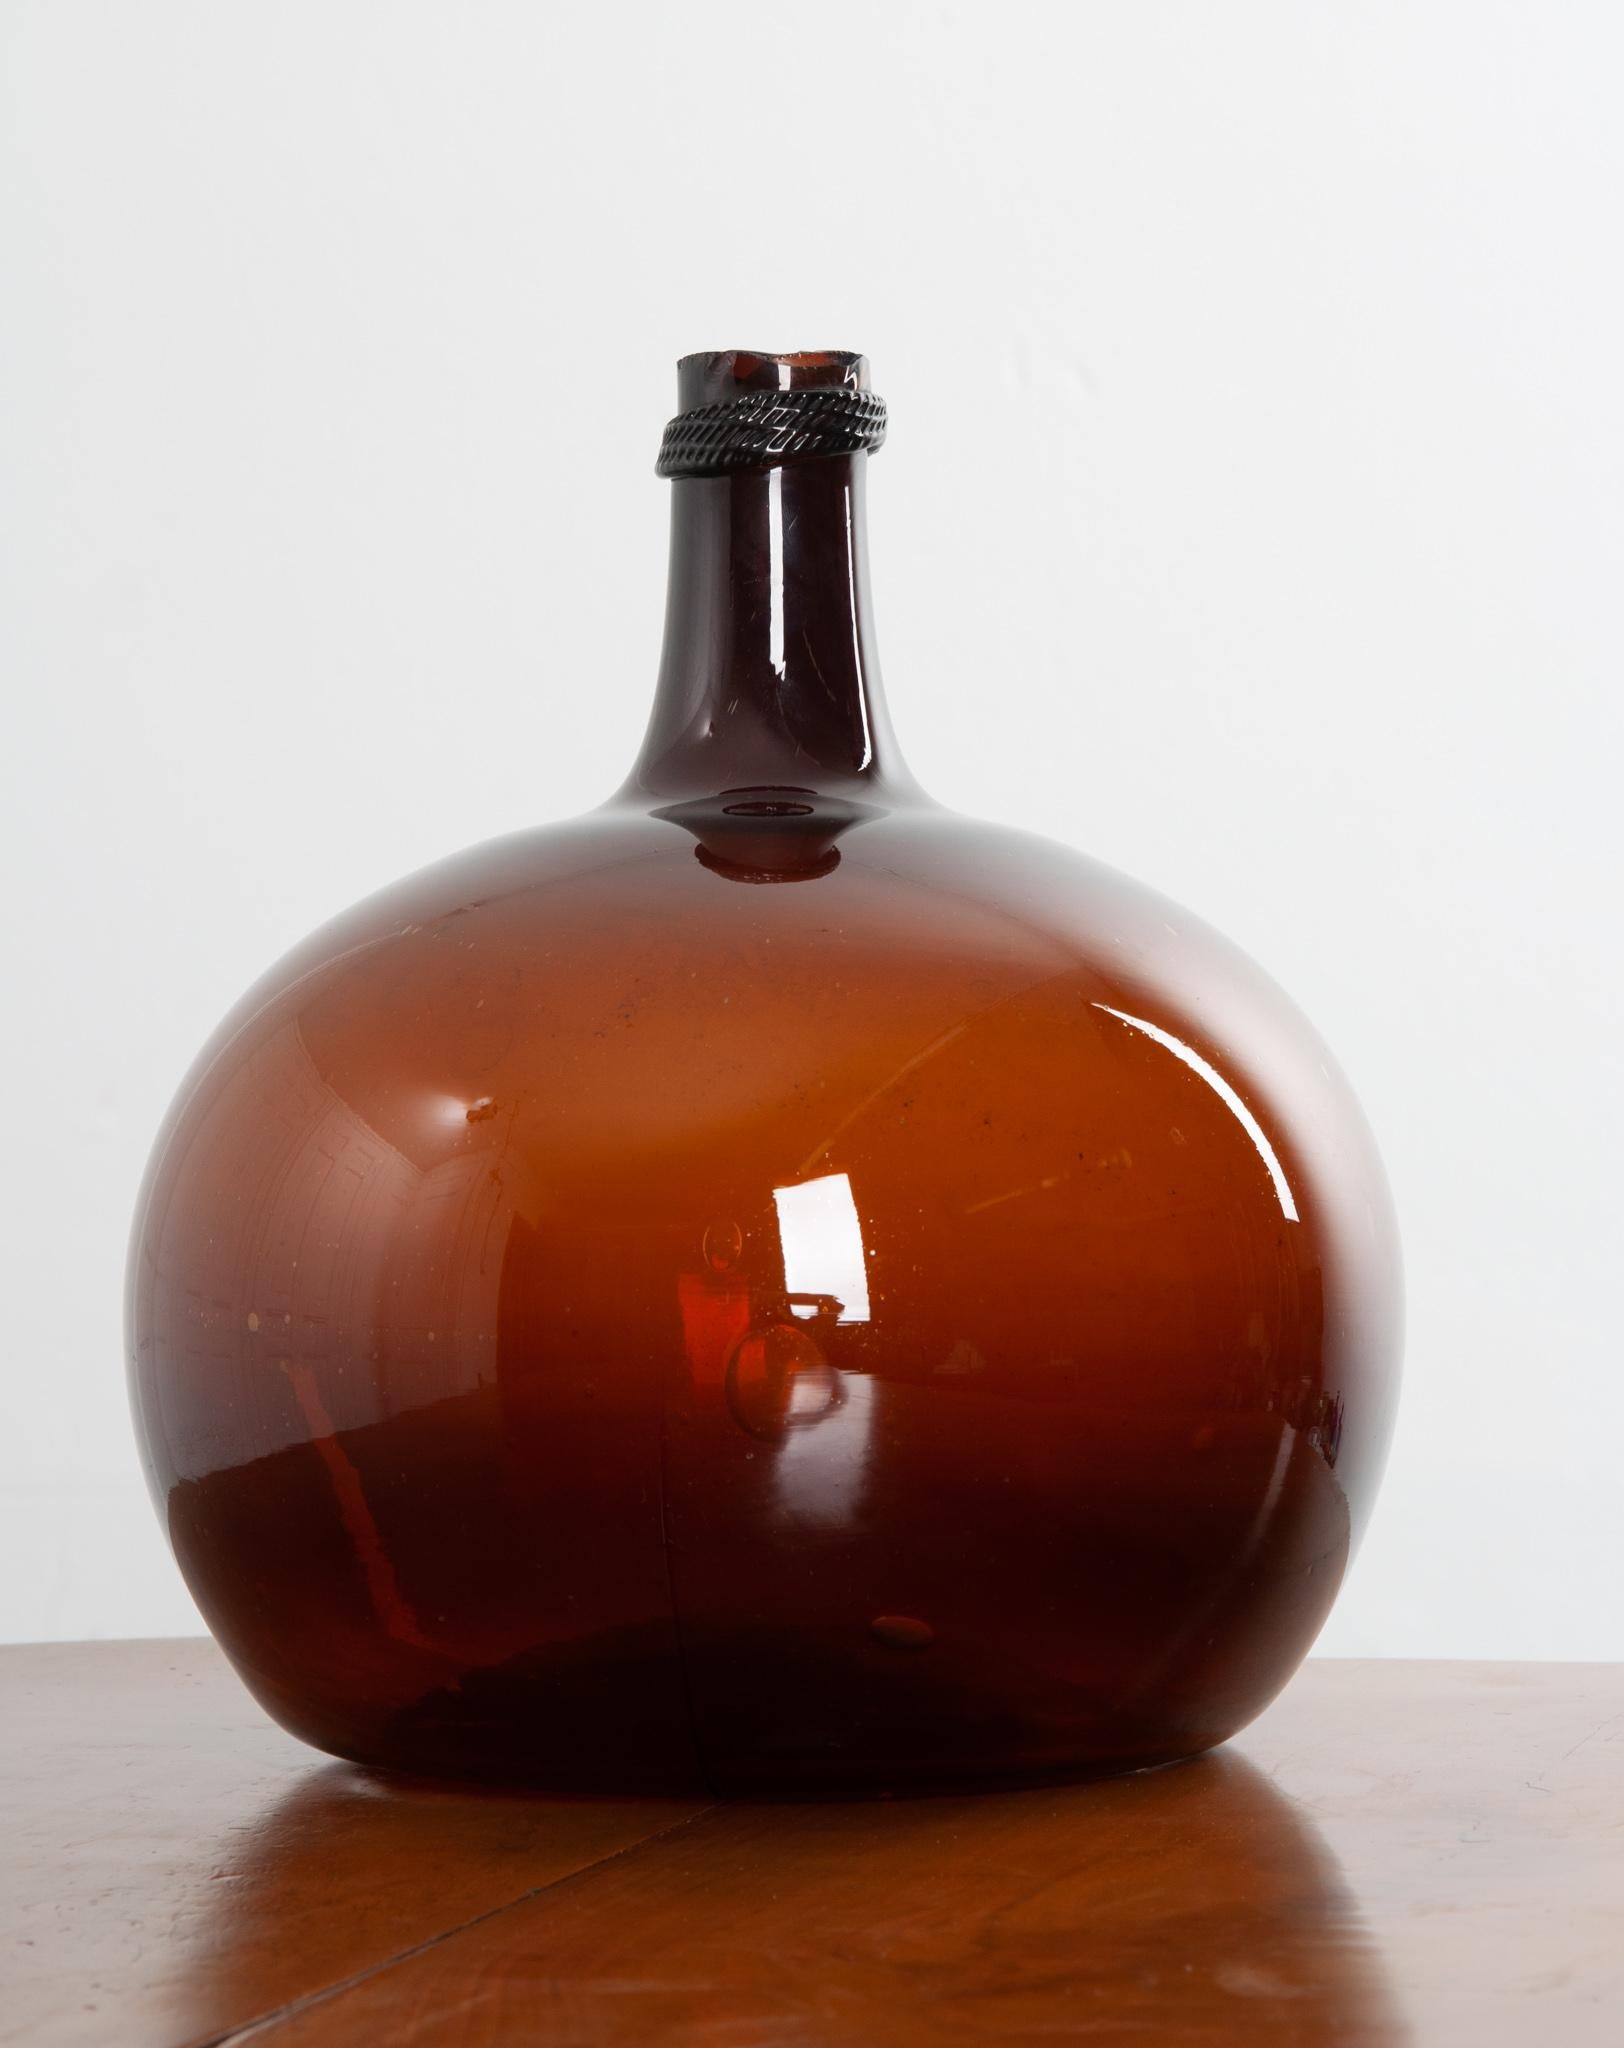 This beautiful, amber blown glass wine keg, or demijohn as they are sometimes called, remains fully intact. Still in wonderful condition, this piece would be a great addition to your space, giving it an element of texture and color. They make